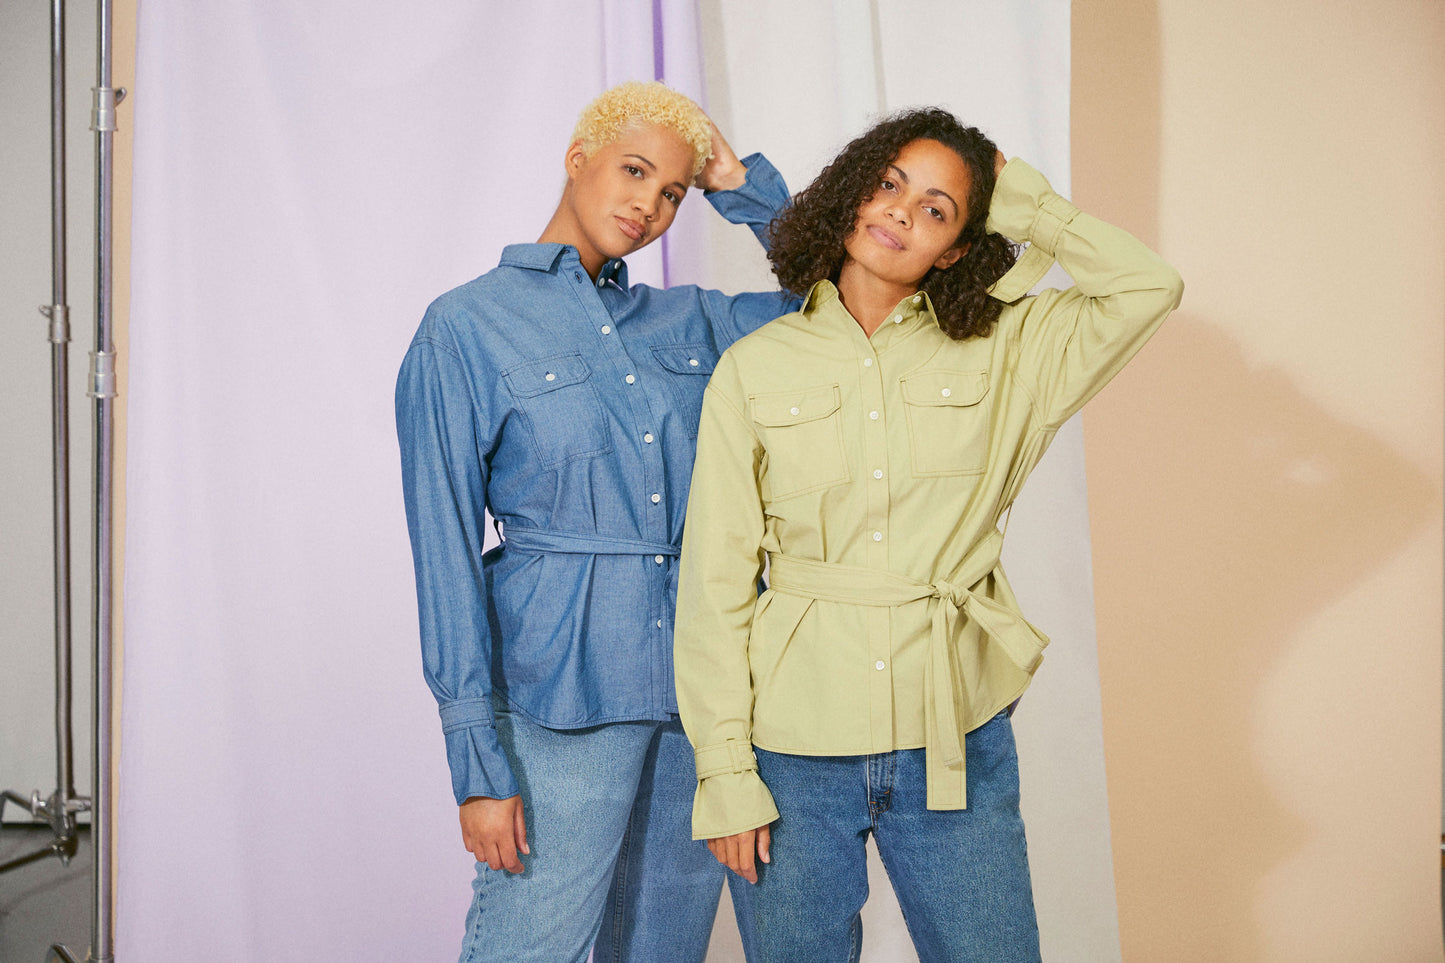 Womens Oversized Shirt in khaki olive, with detachable tie belt and safari styling details. Belted cuffs for sleeve details and utility patch pockets. Zadie Boyfriend Shirt by Saywood. Two models stand side by side. The model on the right wears the olive shirt. The model on the left wears the denim oversized shirt colourway.